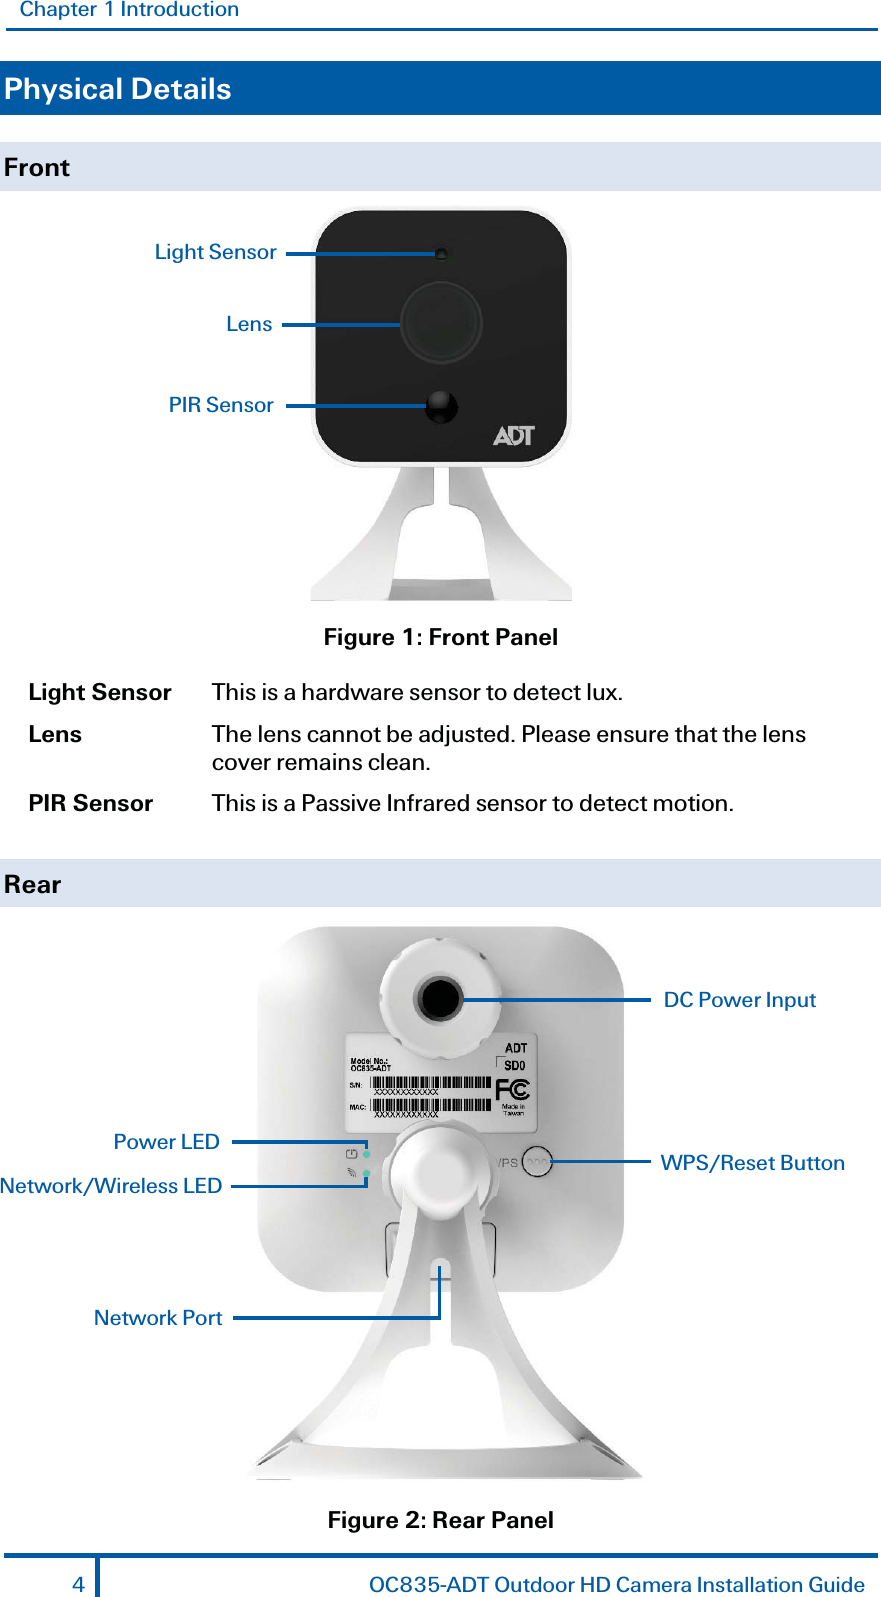 Chapter 1 Introduction Physical Details Front  Figure 1: Front Panel Light Sensor  This is a hardware sensor to detect lux. Lens  The lens cannot be adjusted. Please ensure that the lens cover remains clean.  PIR Sensor  This is a Passive Infrared sensor to detect motion. Rear  Figure 2: Rear Panel Light Sensor Lens PIR SensorNetwork Port WPS/Reset Button DC Power Input Power LED Network/Wireless LED 4  OC835-ADT Outdoor HD Camera Installation Guide 